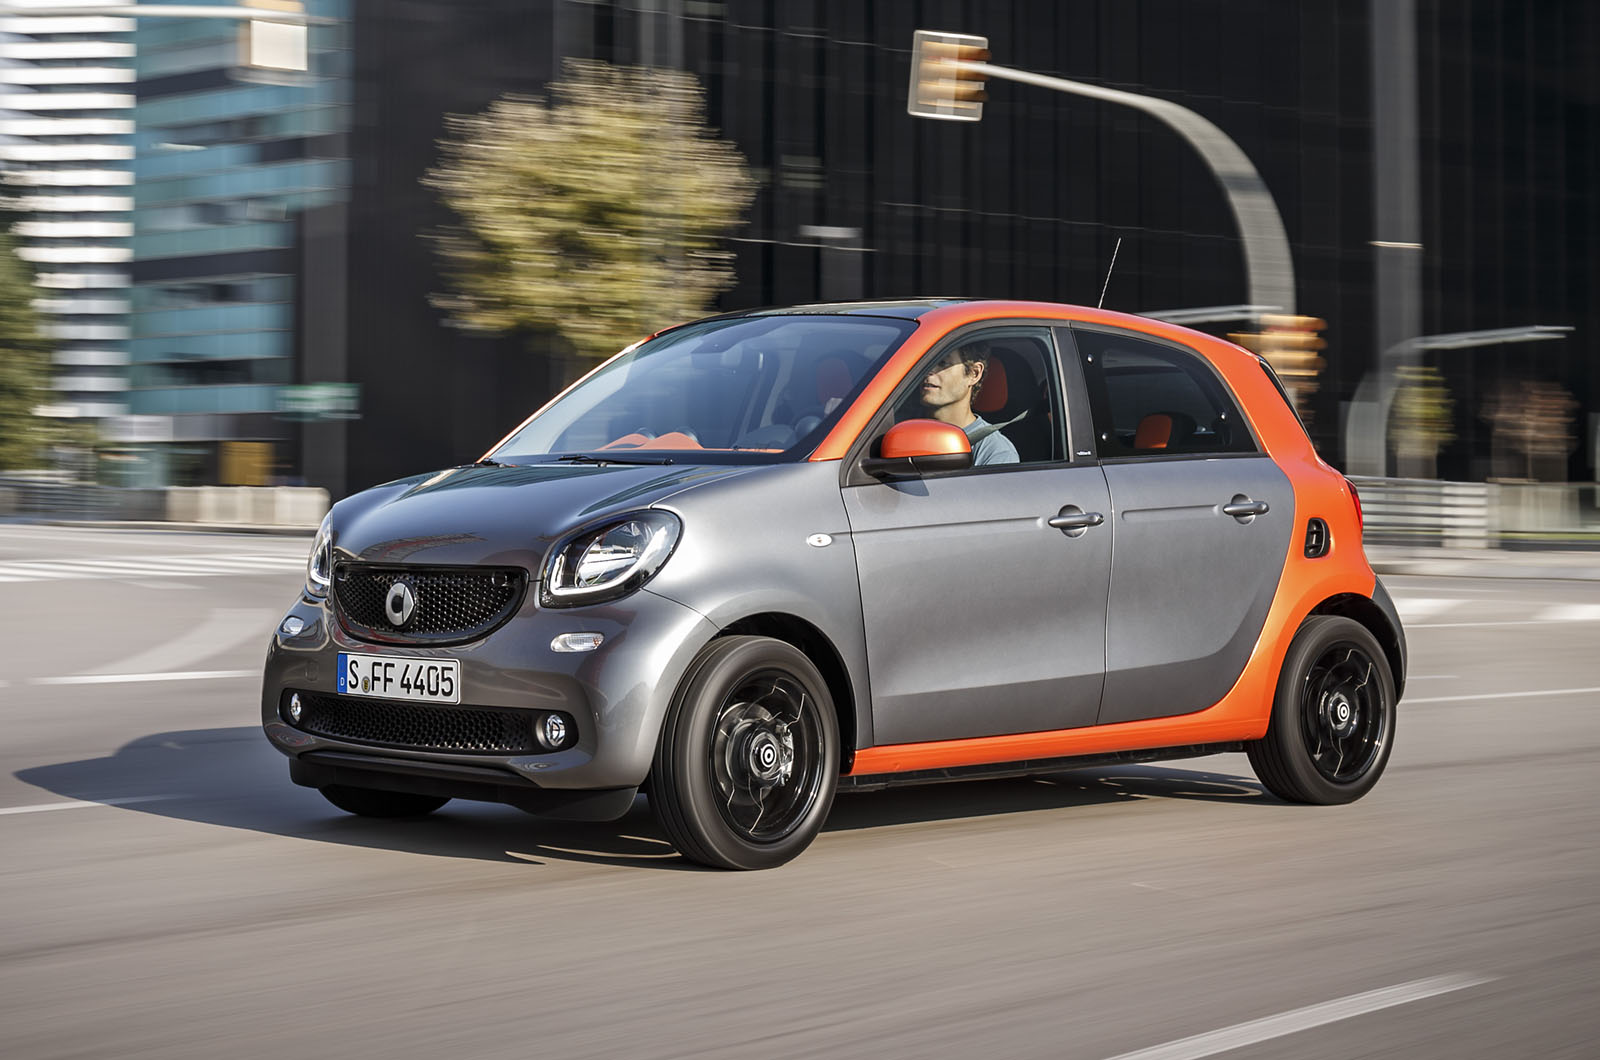 2015 Smart Fortwo and Forfour - pricing, engines and specs | Autocar